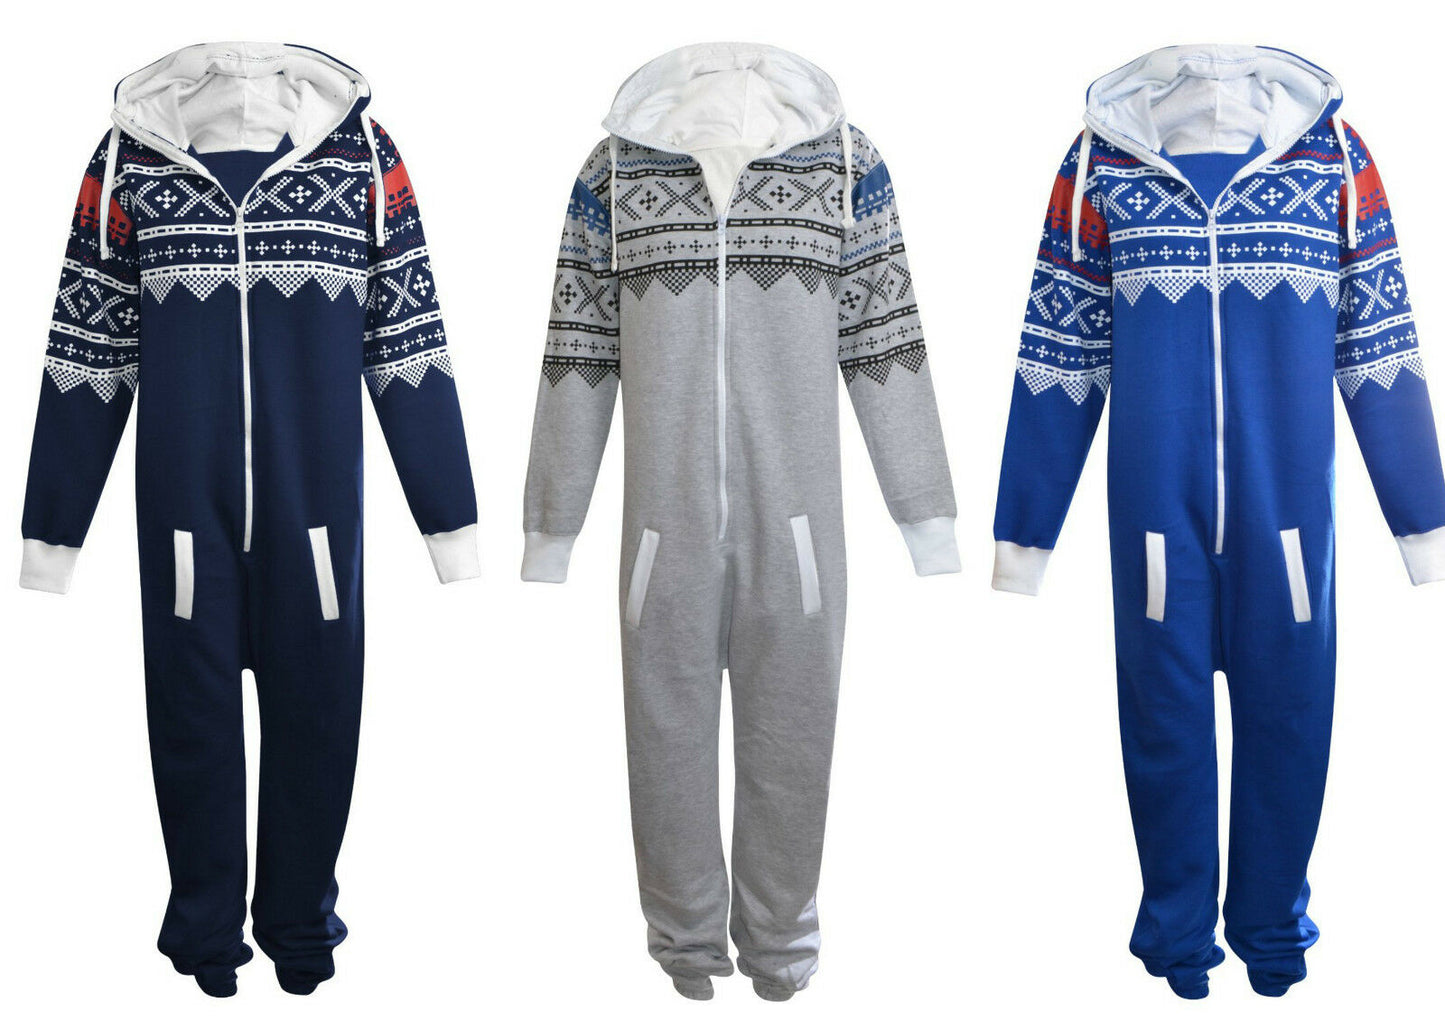 Adults Aztec Onesies. Cotton Lined Hood With Fleece Lining In The Rest Of The Onesie. The Cuffs and Ankles Are Ribbed Elastic. These Are To Be Worn Loosely. Sizes Small To X- Large.Multiple Colours Available.